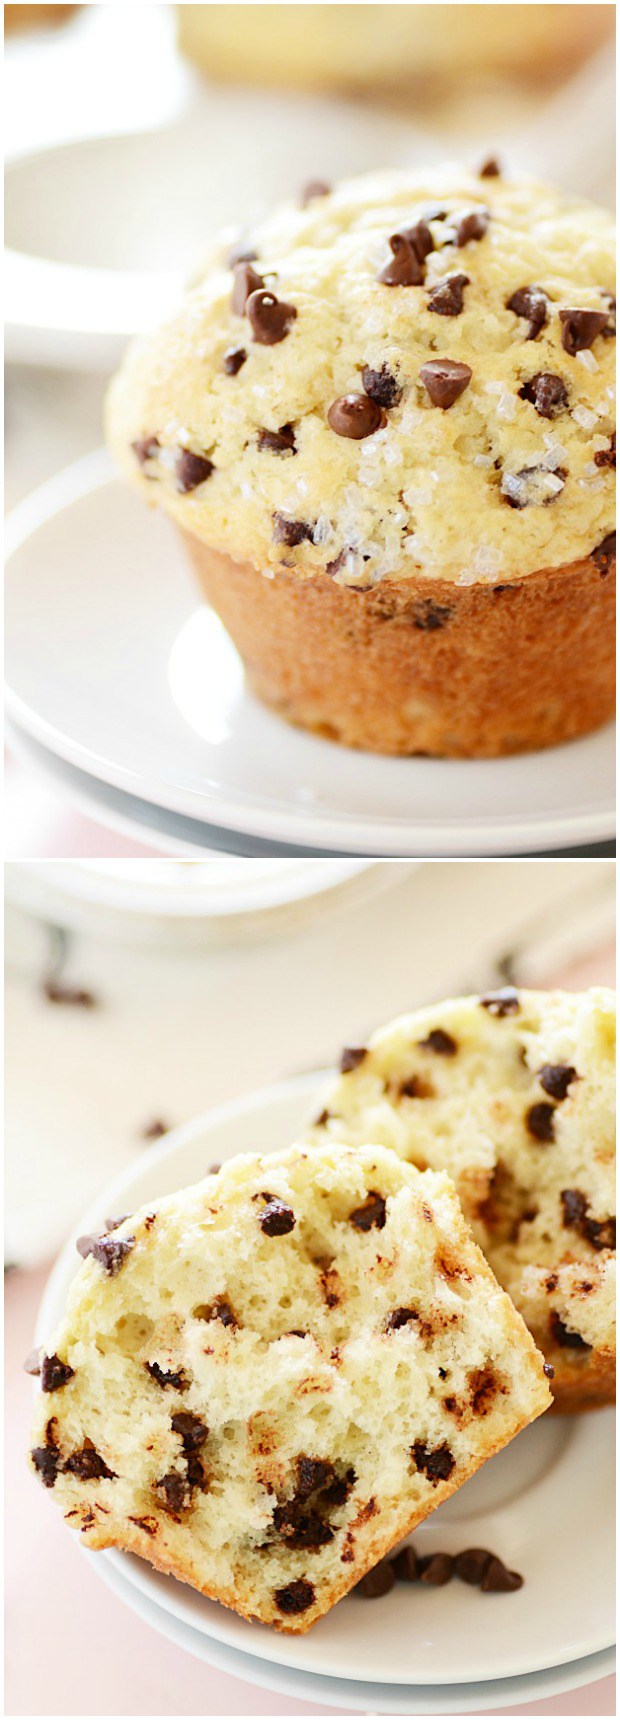 Bakery style choco chip muffins

1 cup milk

1/4 cup vinegar

2 1/2 cups all-purpose flour

1 tb ...